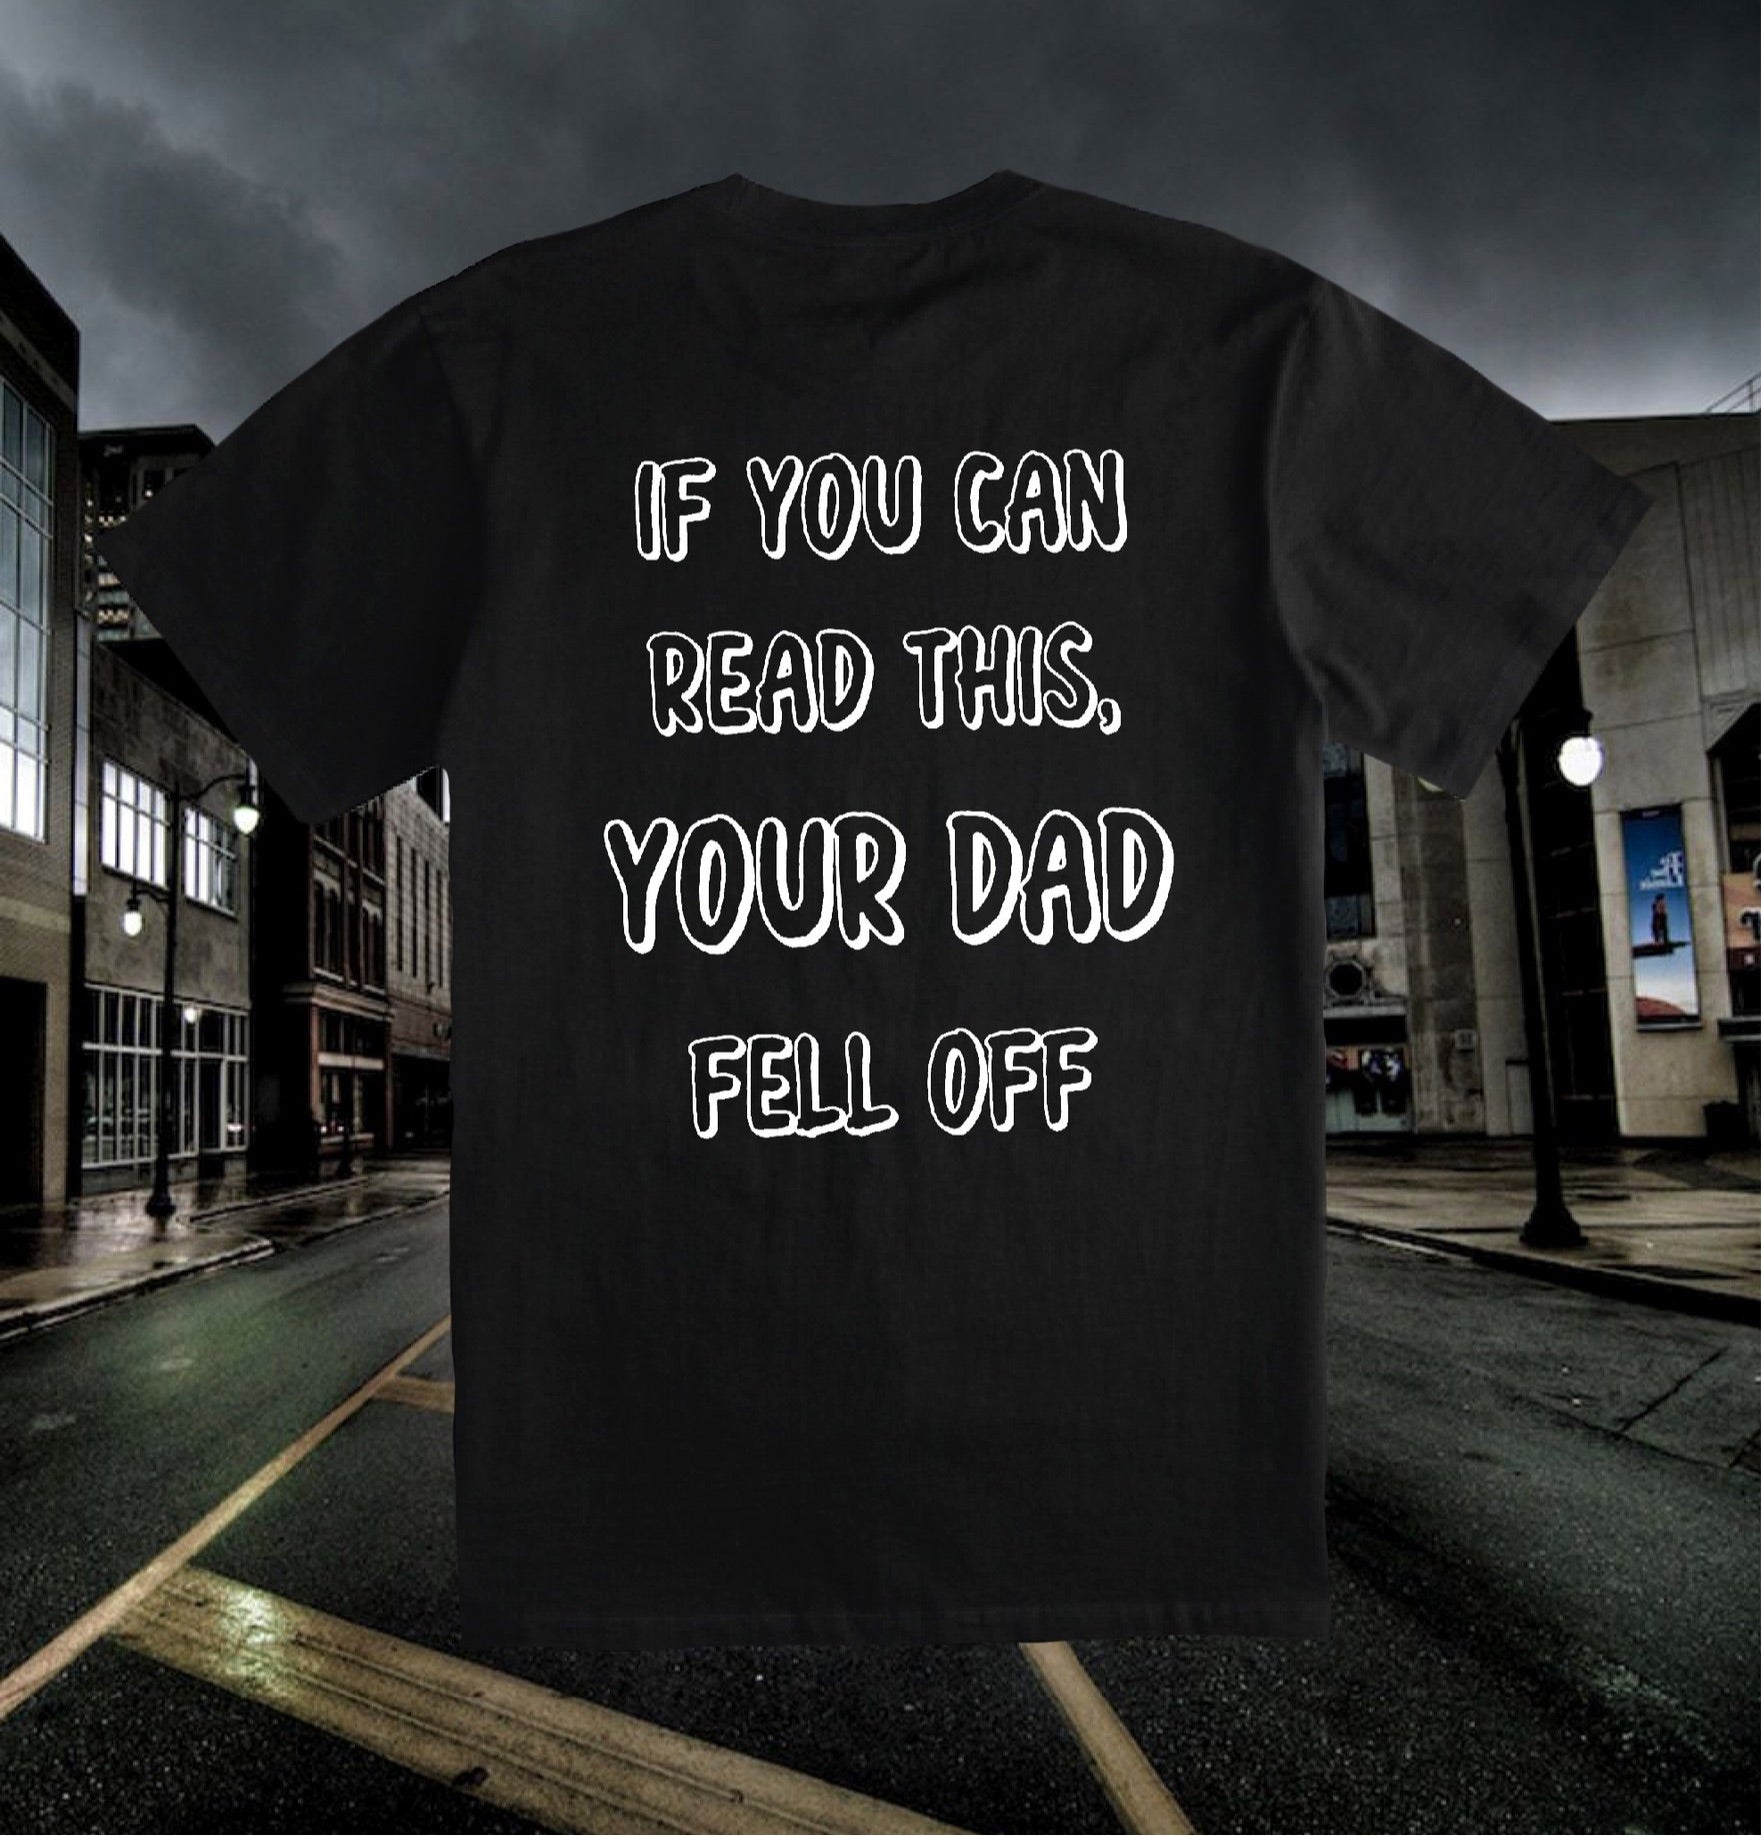 Your Dad Fell Off T-Shirt